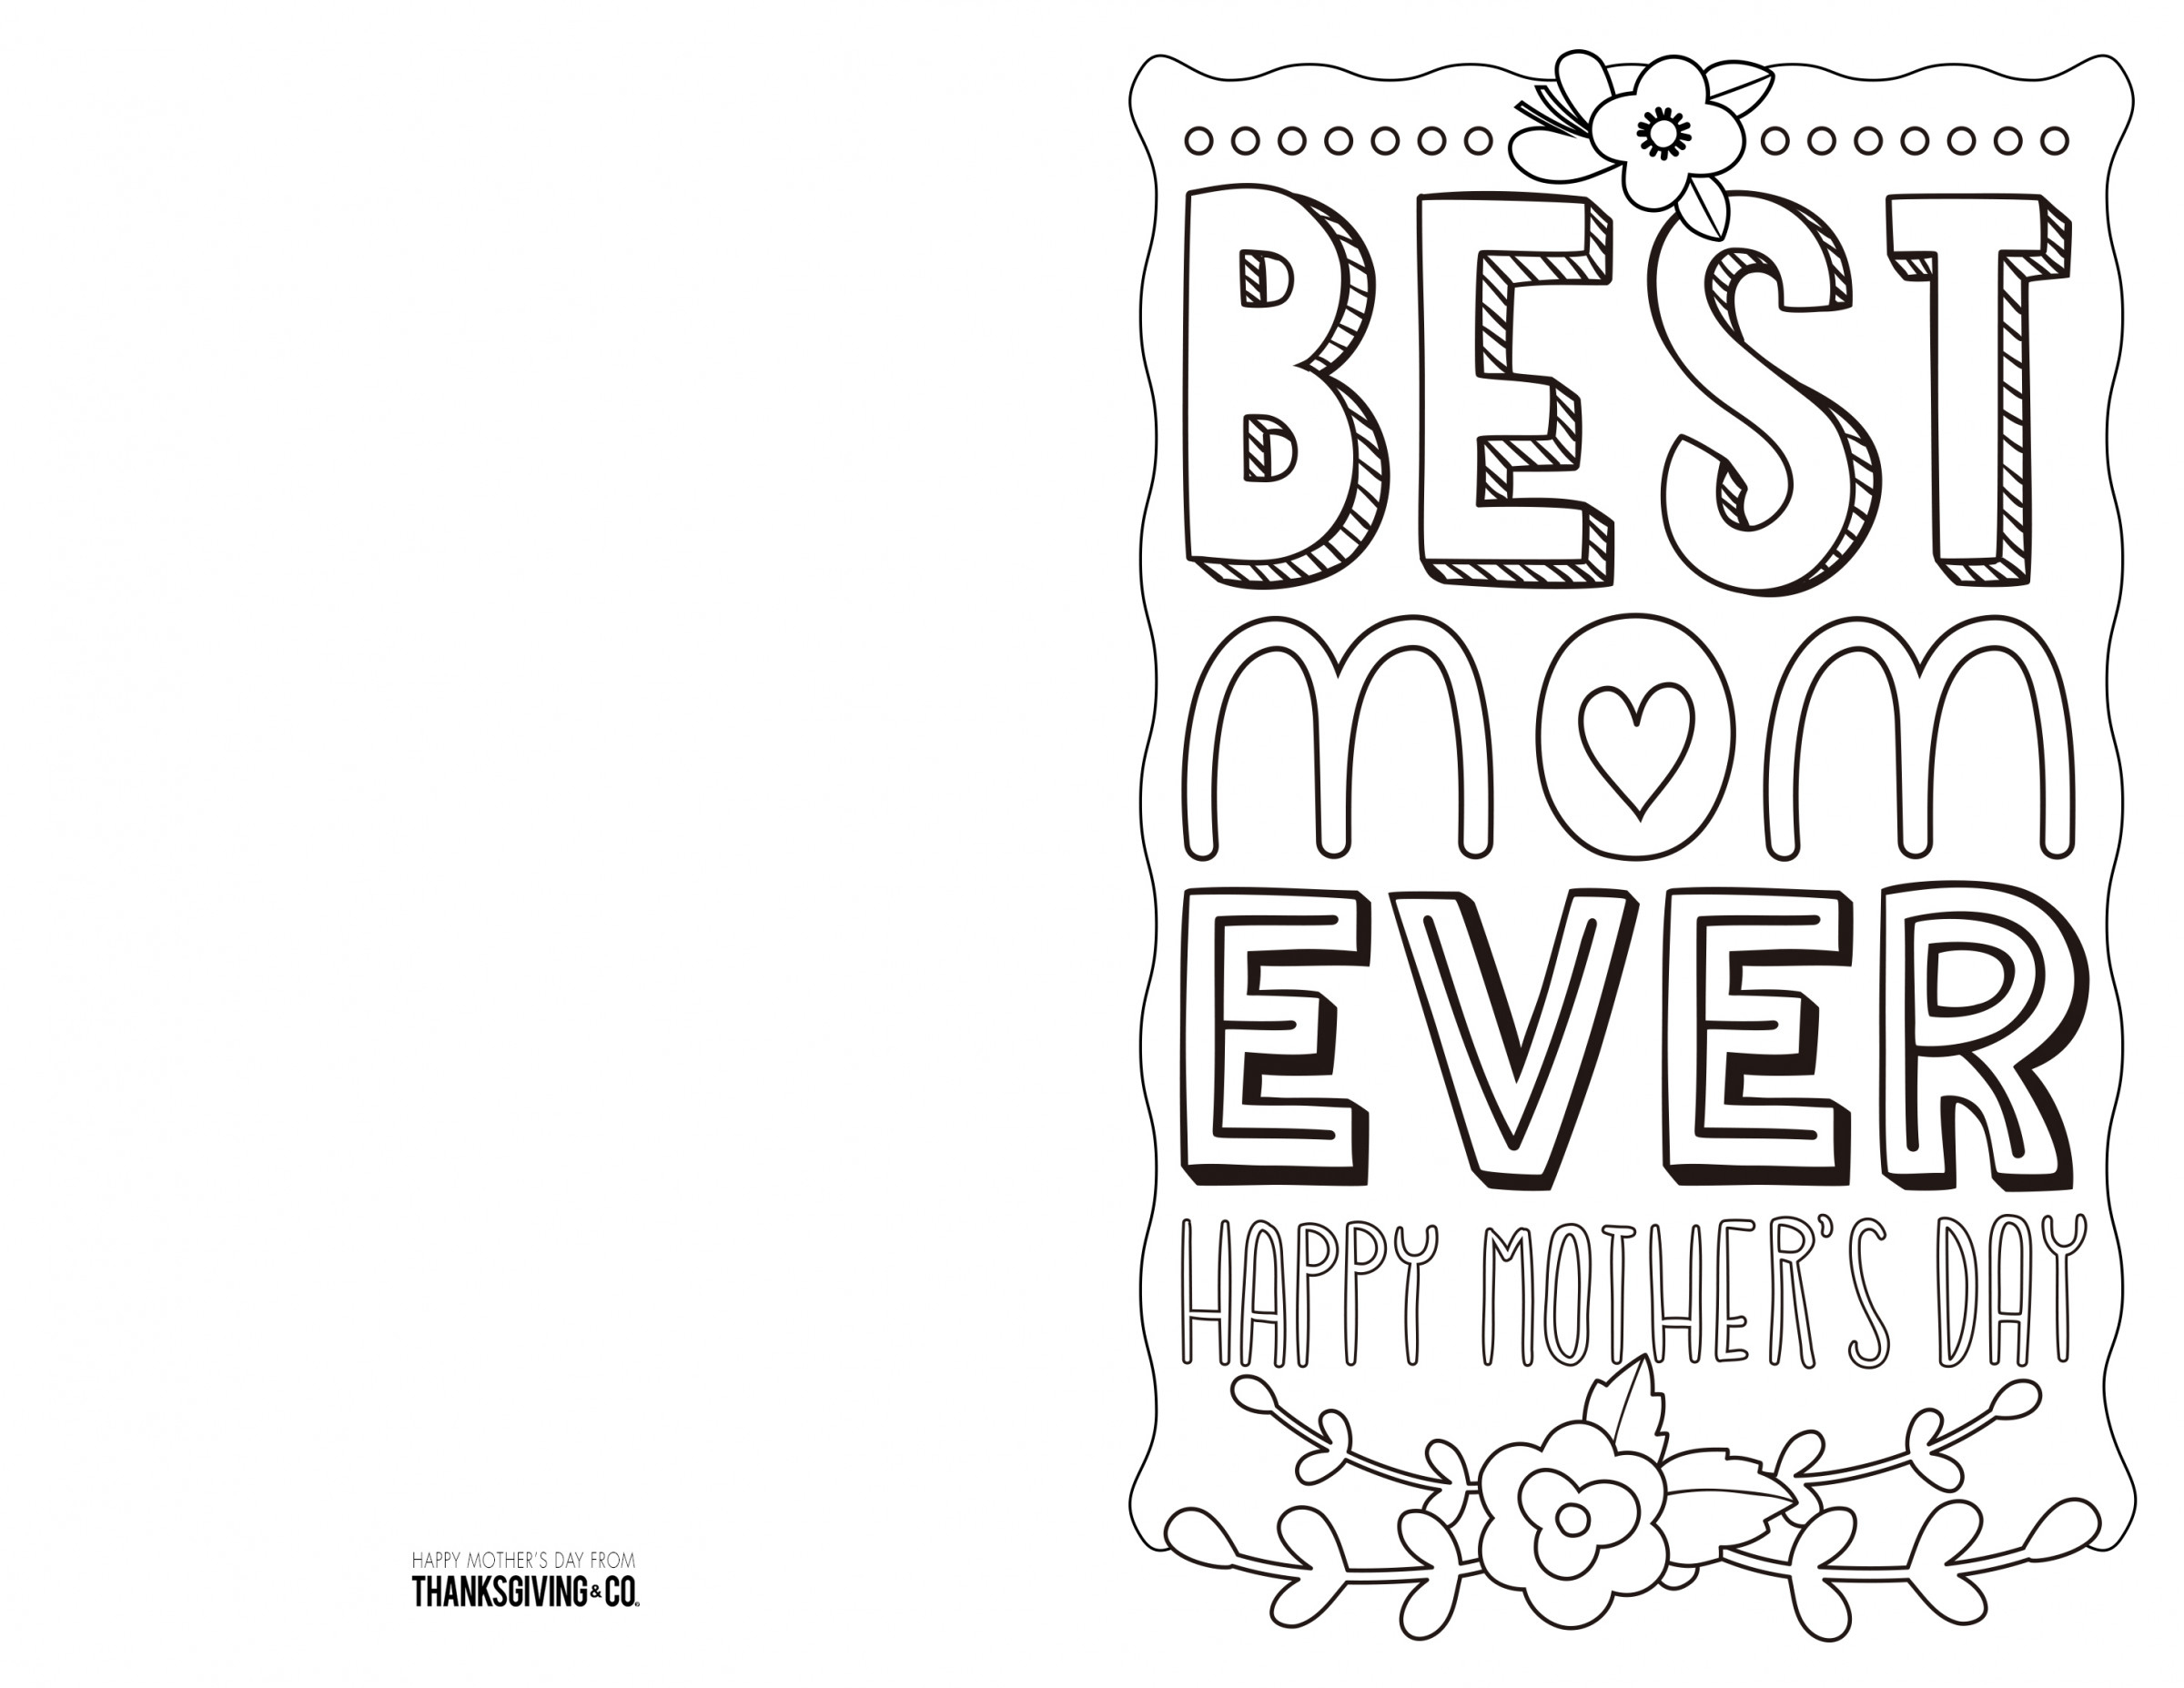 4 Free Printable Mother&amp;#039;s Day Ecards To Color - Thanksgiving - Free Printable Mothers Day Cards To Color